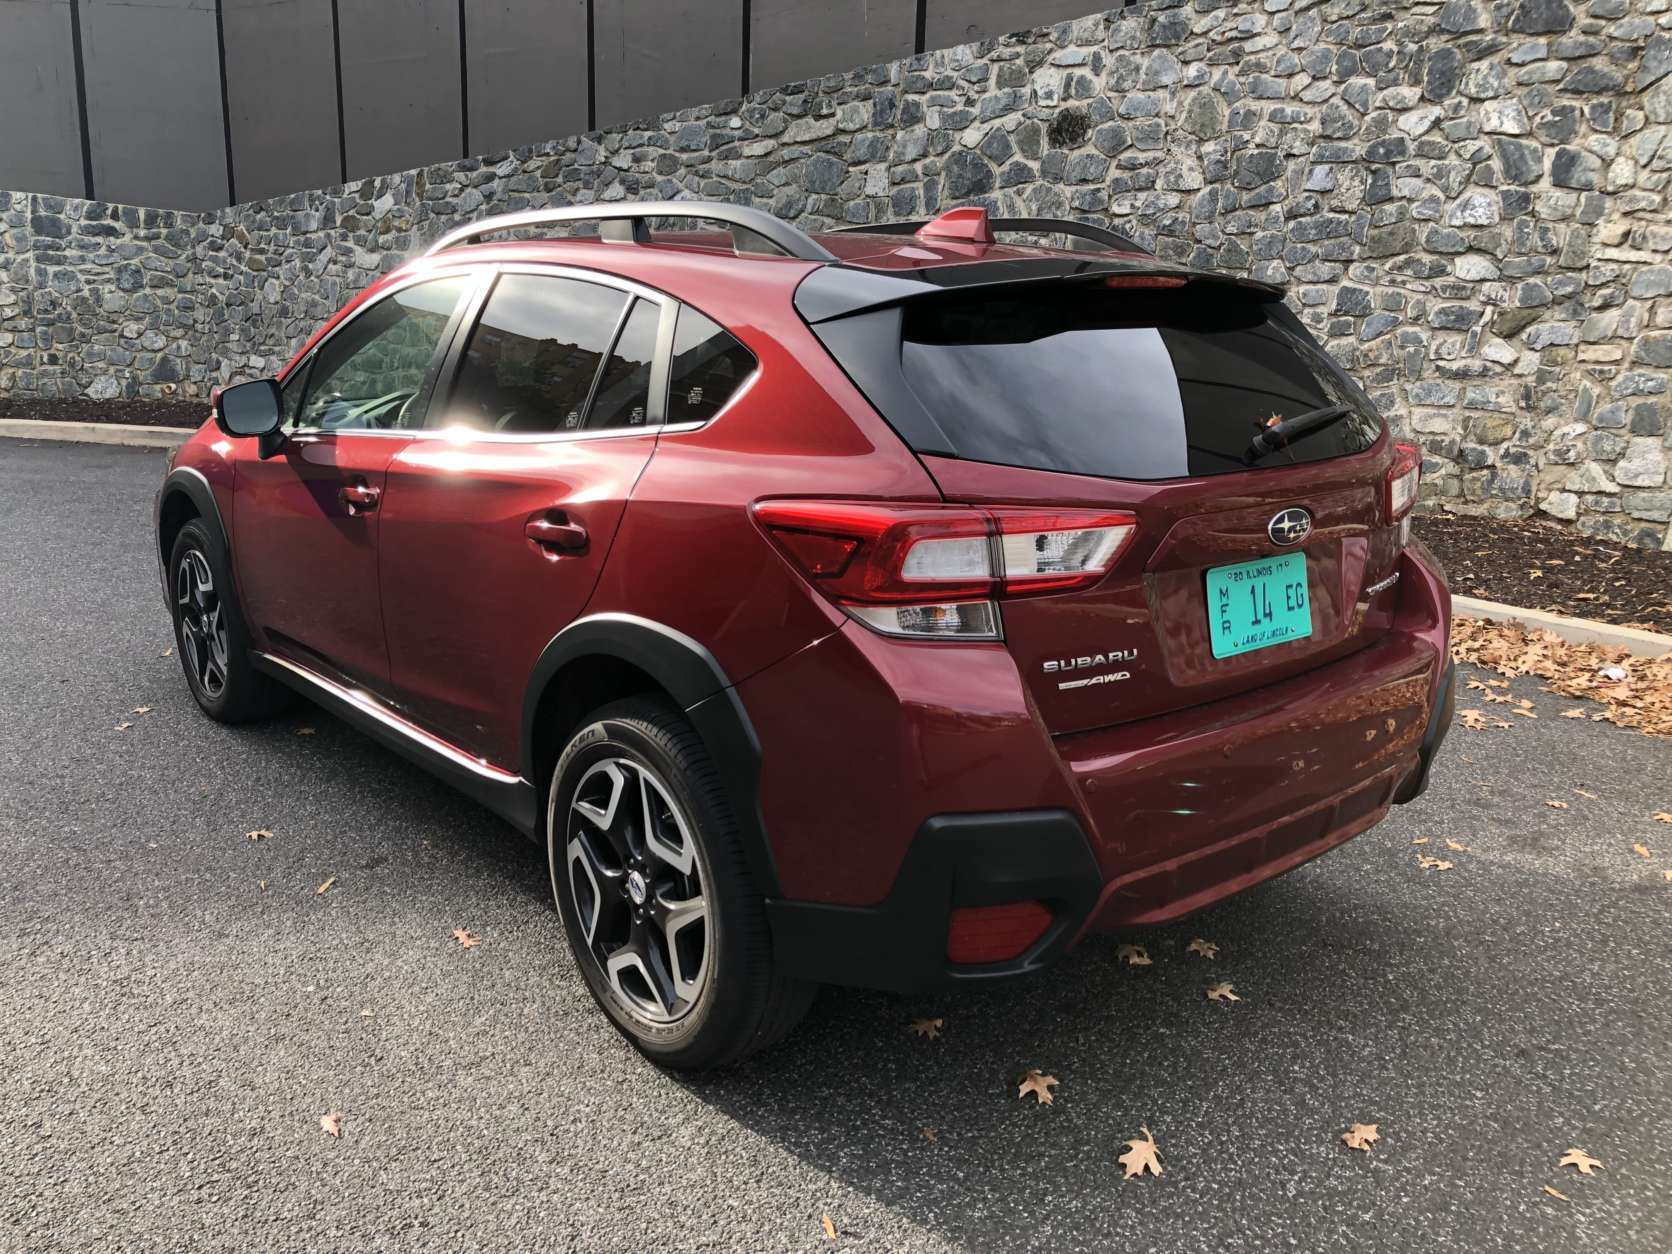 The styling has been updated; while it’s not a huge departure from before, the new Crosstrek does look more like a crossover than the tall wagon. Additionally. power comes from a four-cylinder engine with 152 horsepower. Parris managed 29.5 mpg for the week. (WTOP/Mike Parris)